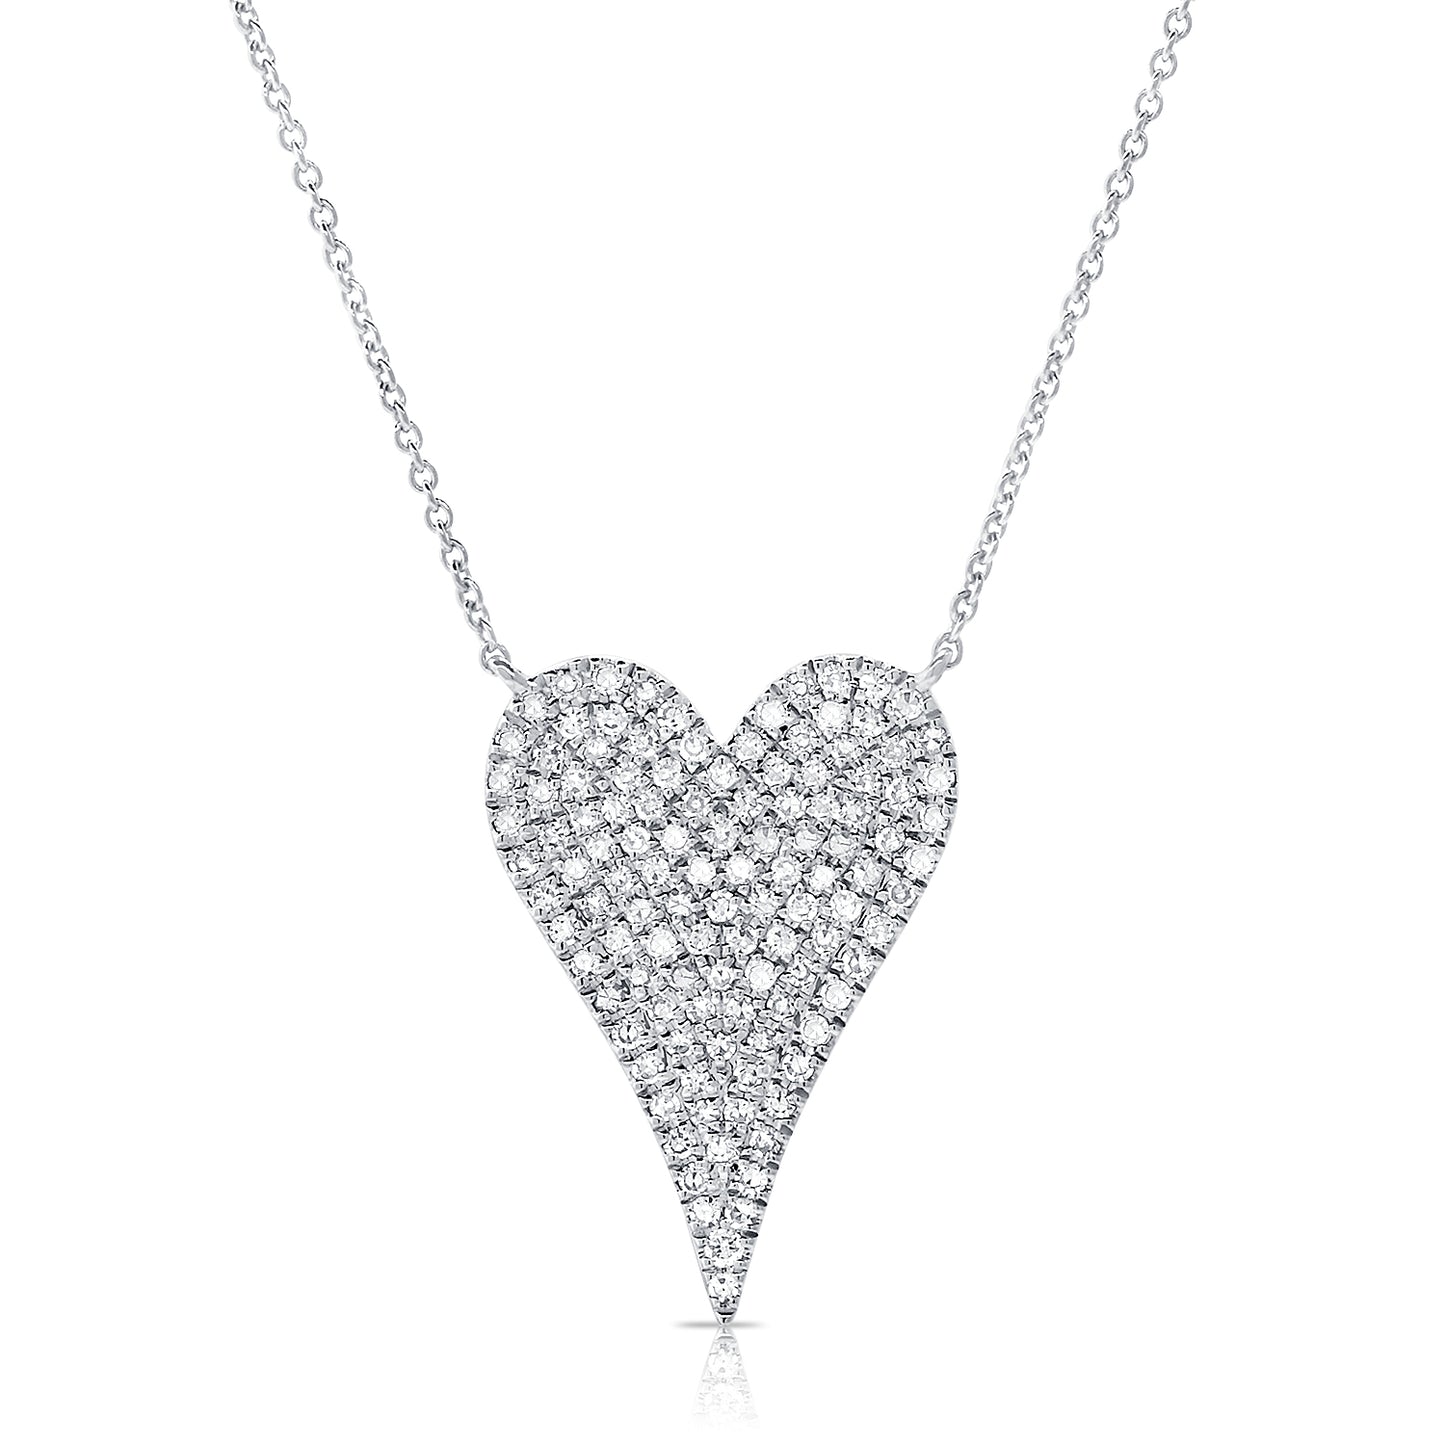 Pave Diamond Elongated Heart On Chain Necklace